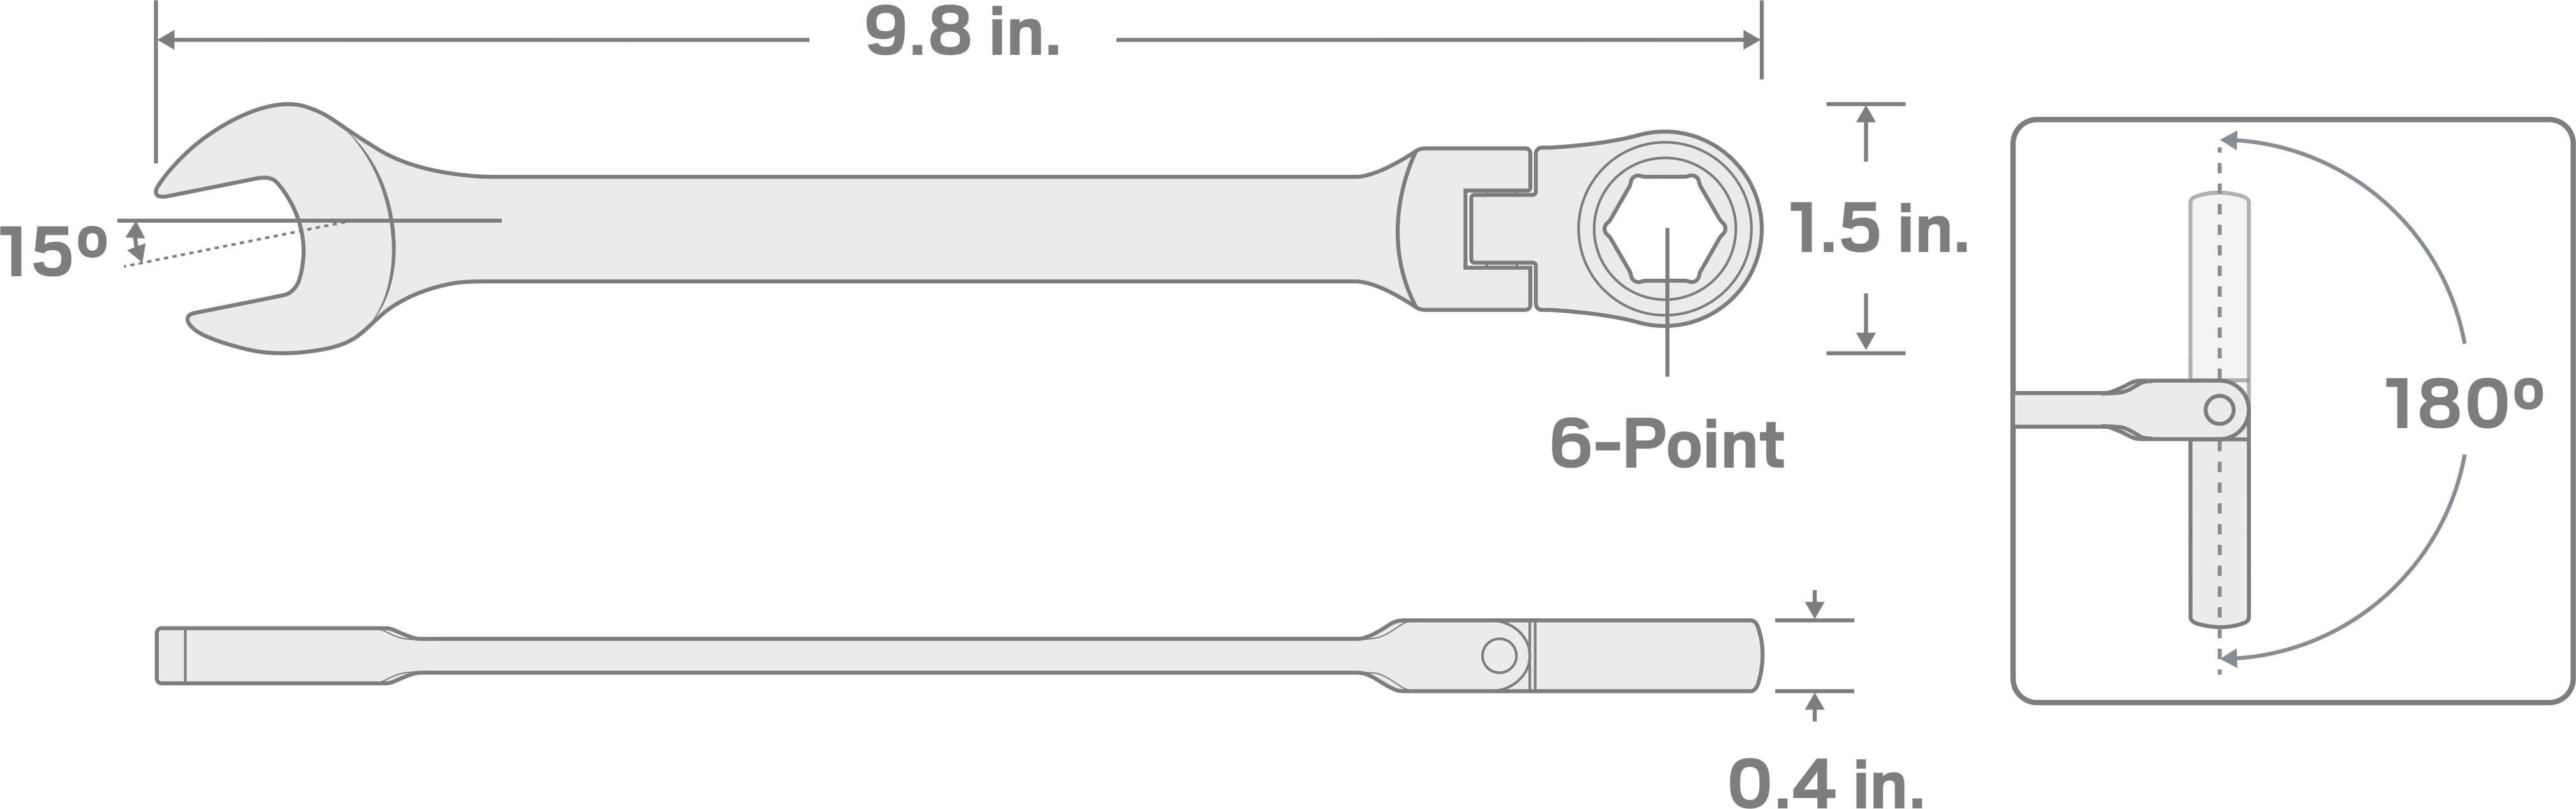 Specs for 18 mm Flex Ratcheting Combination Wrench